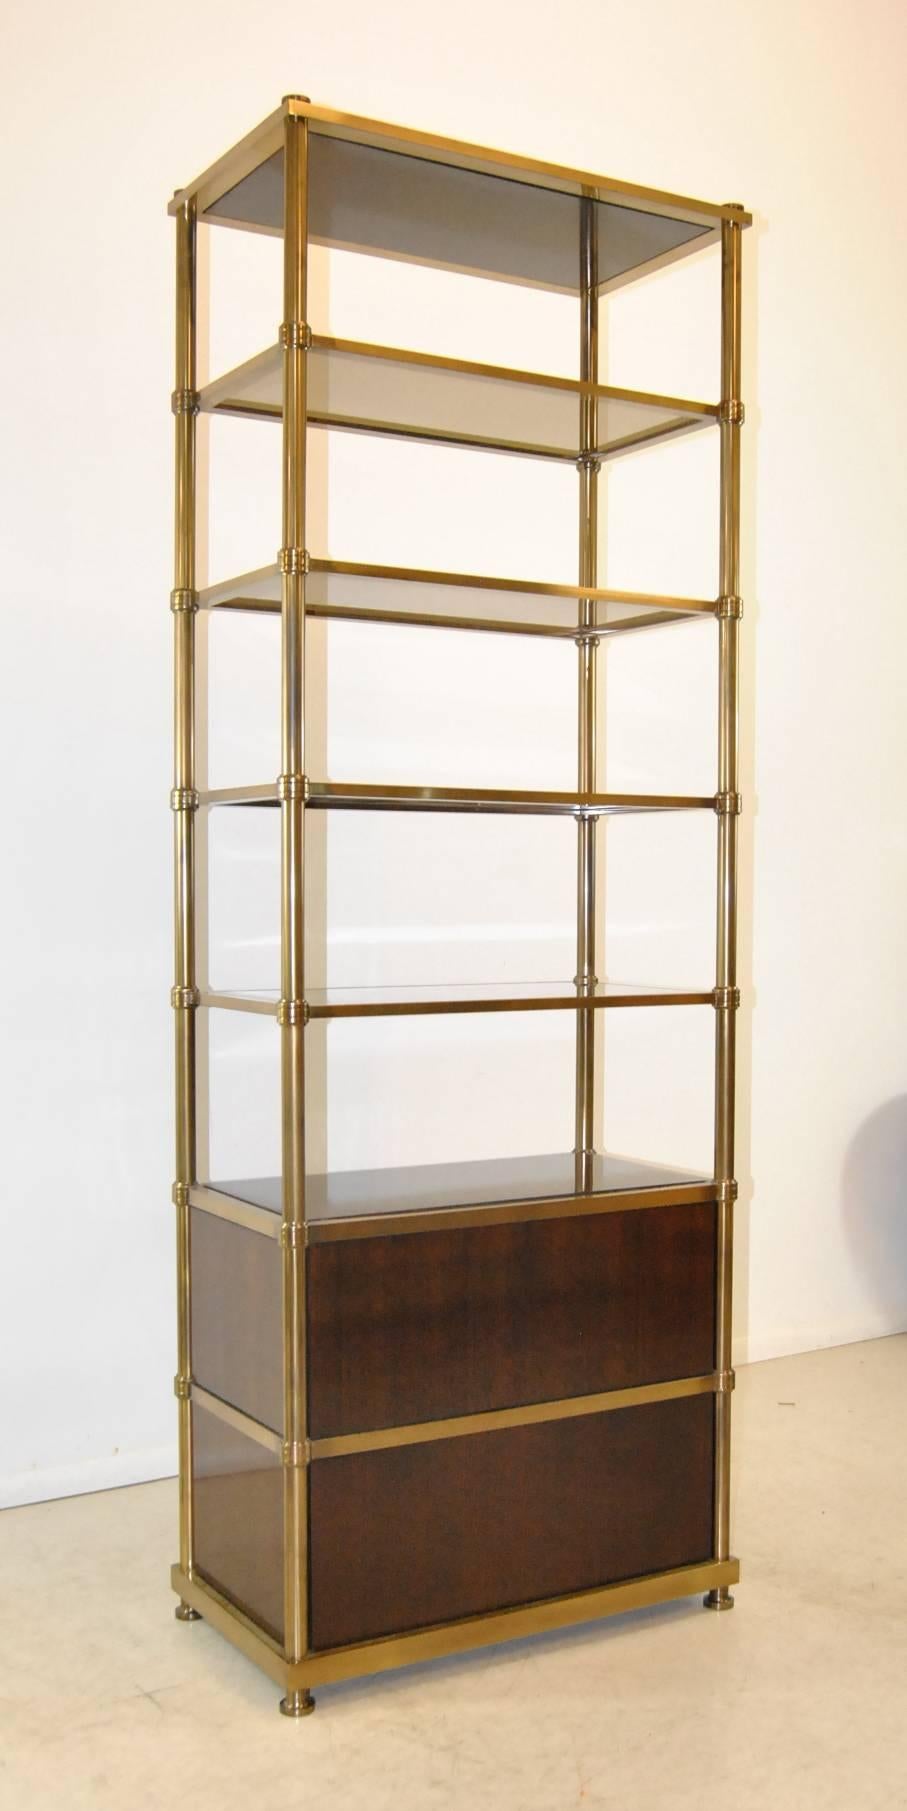 The etagere exemplifies the graphic Minimalist approach which meets designer Laura Kirar's goal of beautiful furniture that is also functional. The étagère features a brass frame finished in polished bronze. The top is American walnut. The étagère's